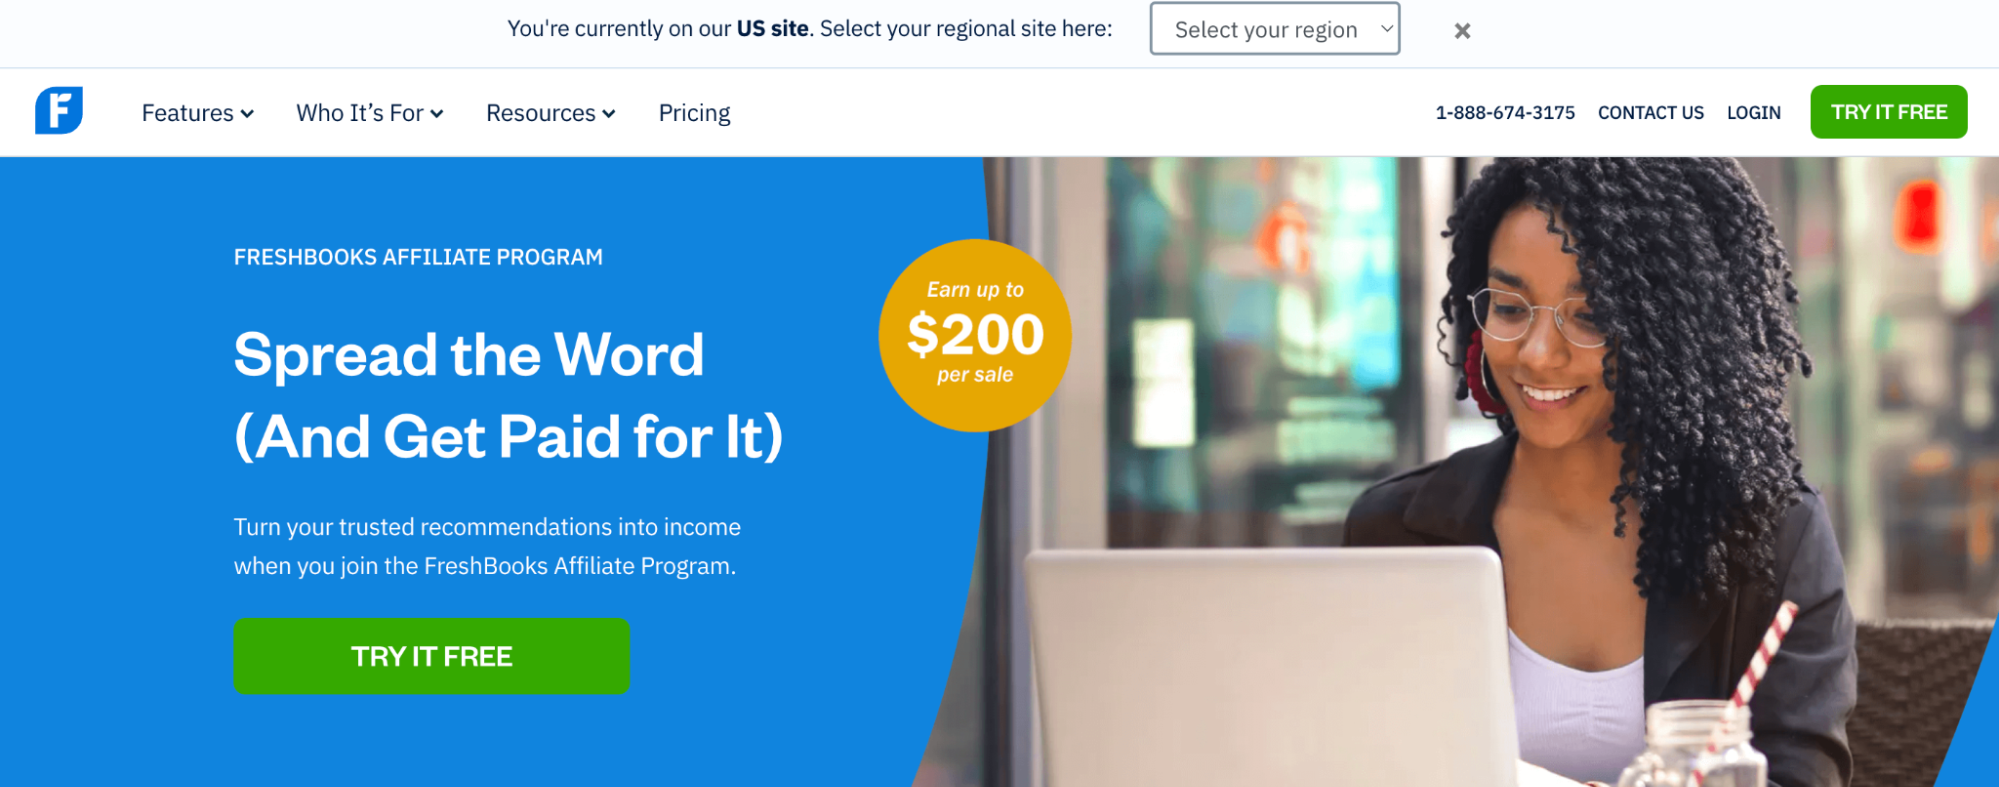 Landing page for Freshbooks’ affiliate program showing up to $200 commission per sale.